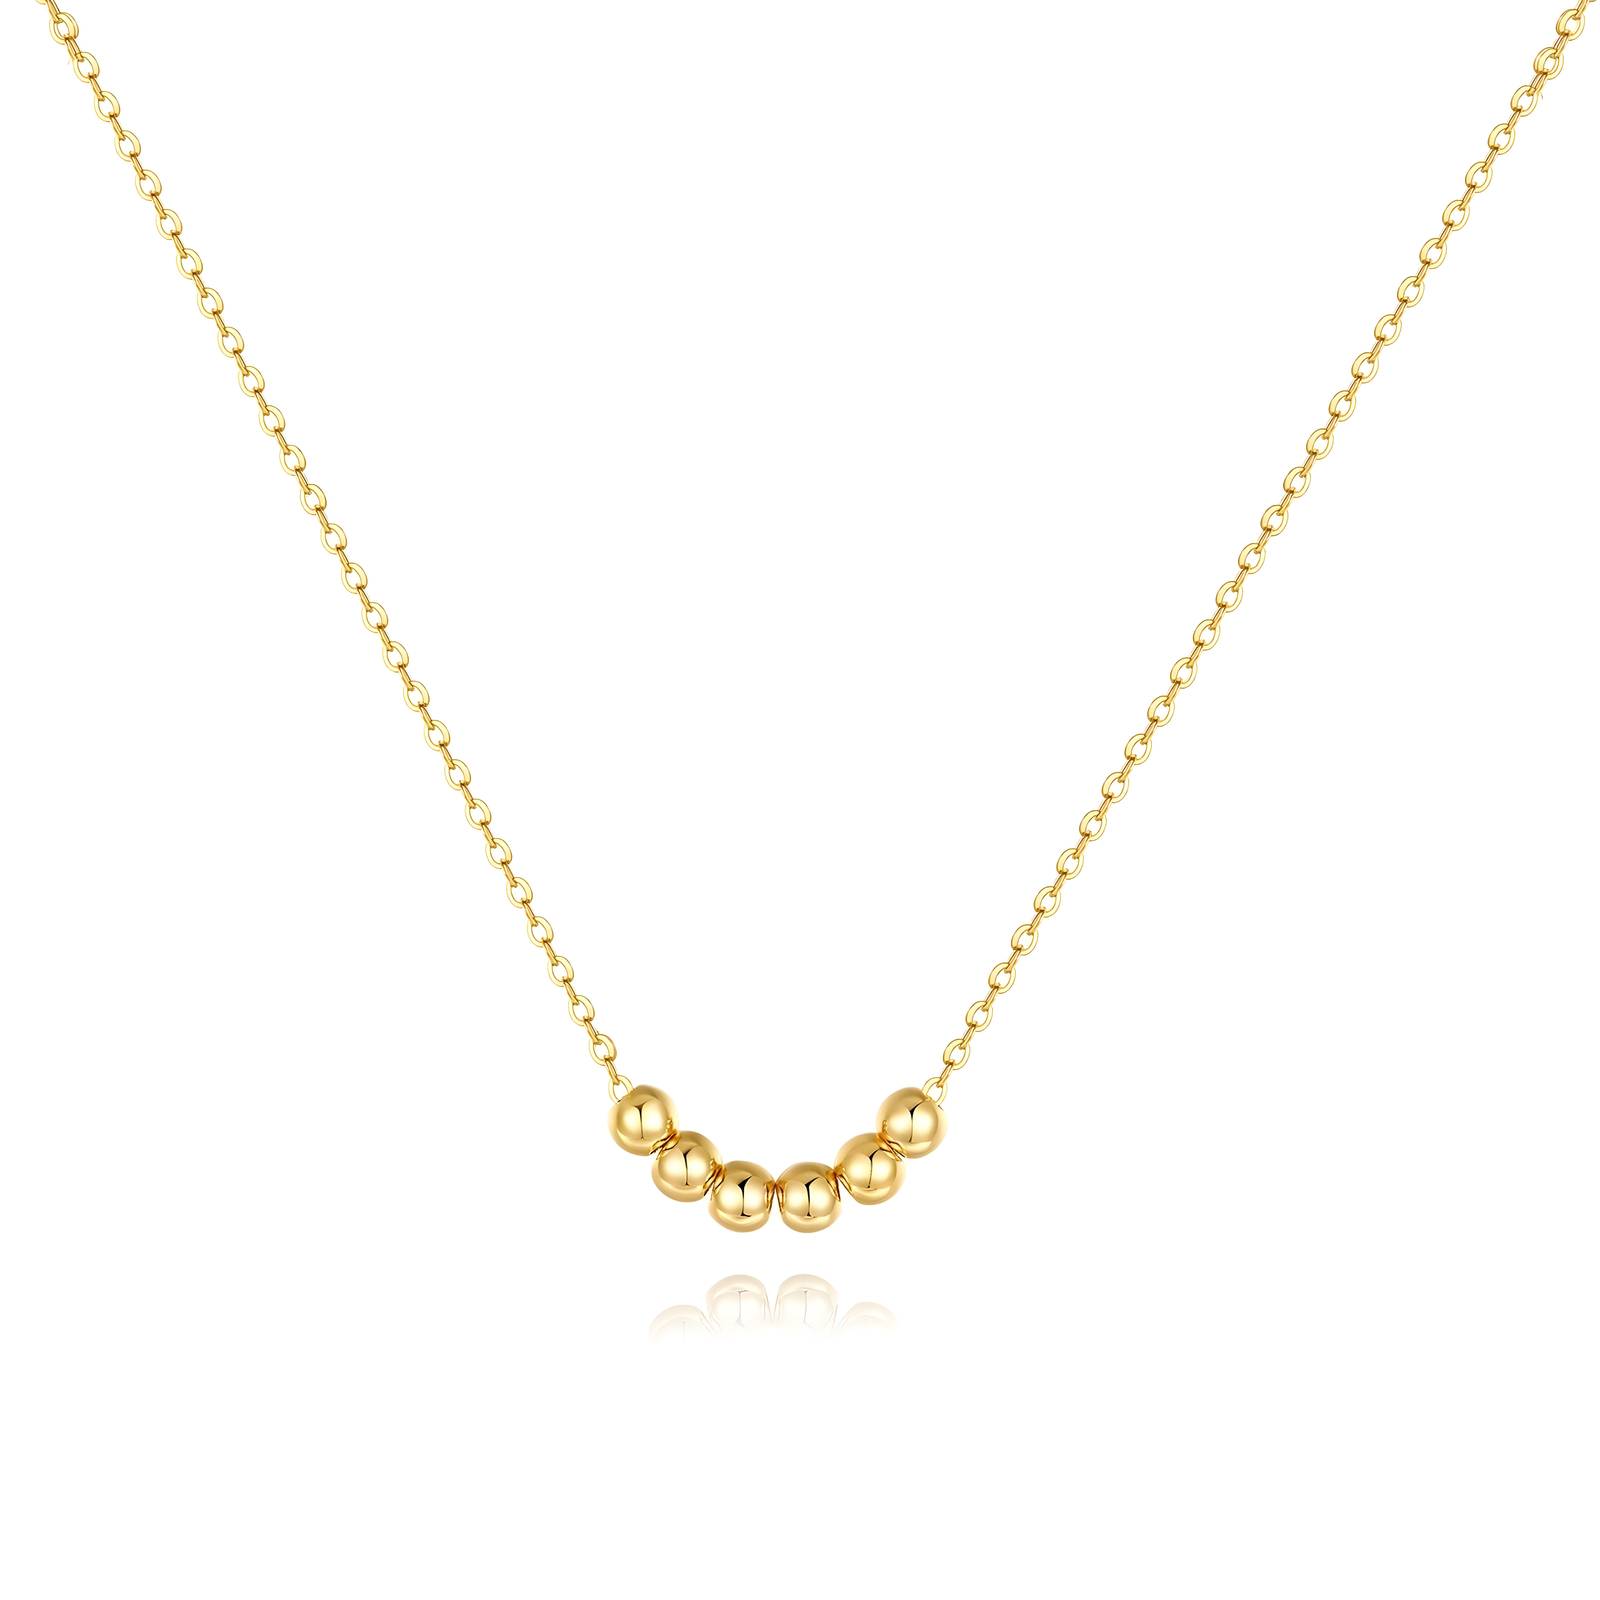 18K gold plated Stainless steel necklace, Intensity SKU #87146-0 ...